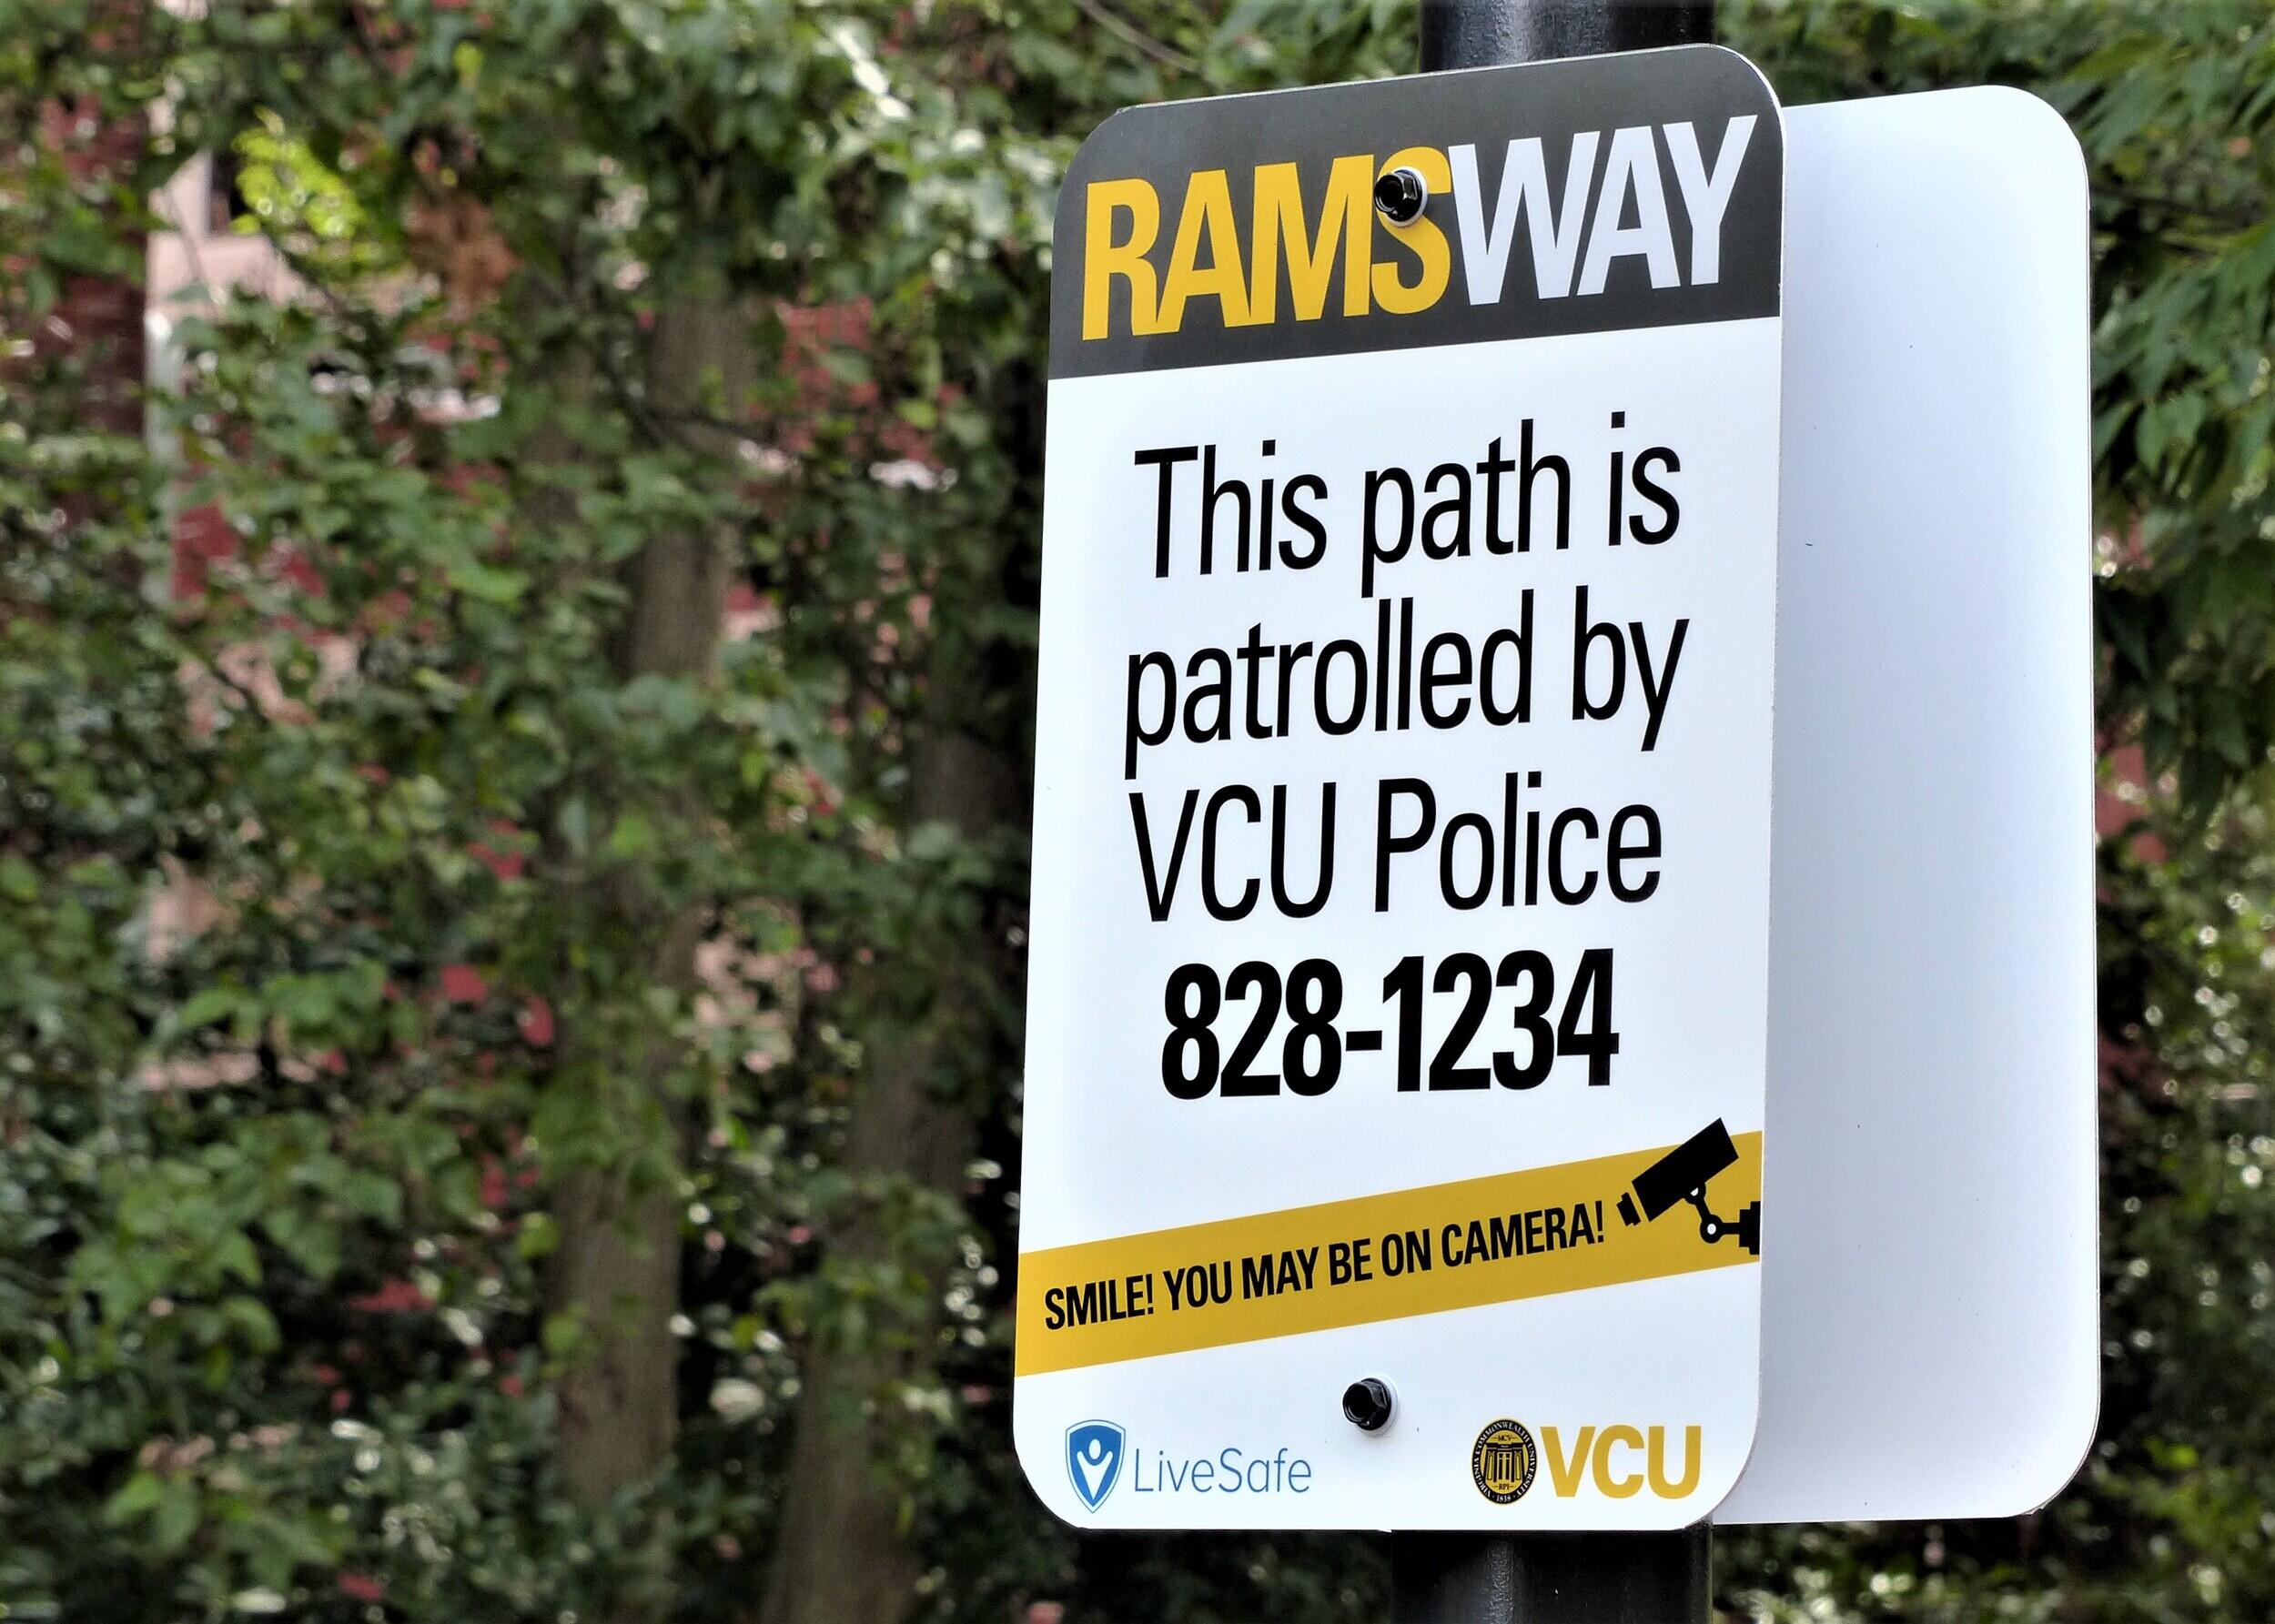 A sign stating "RAMSWAY. This path is patrolled by V C U Police. 828-1234. Smile! You may be on camera!" The V C U and LiveSafe logos are on the bottom of the sign.